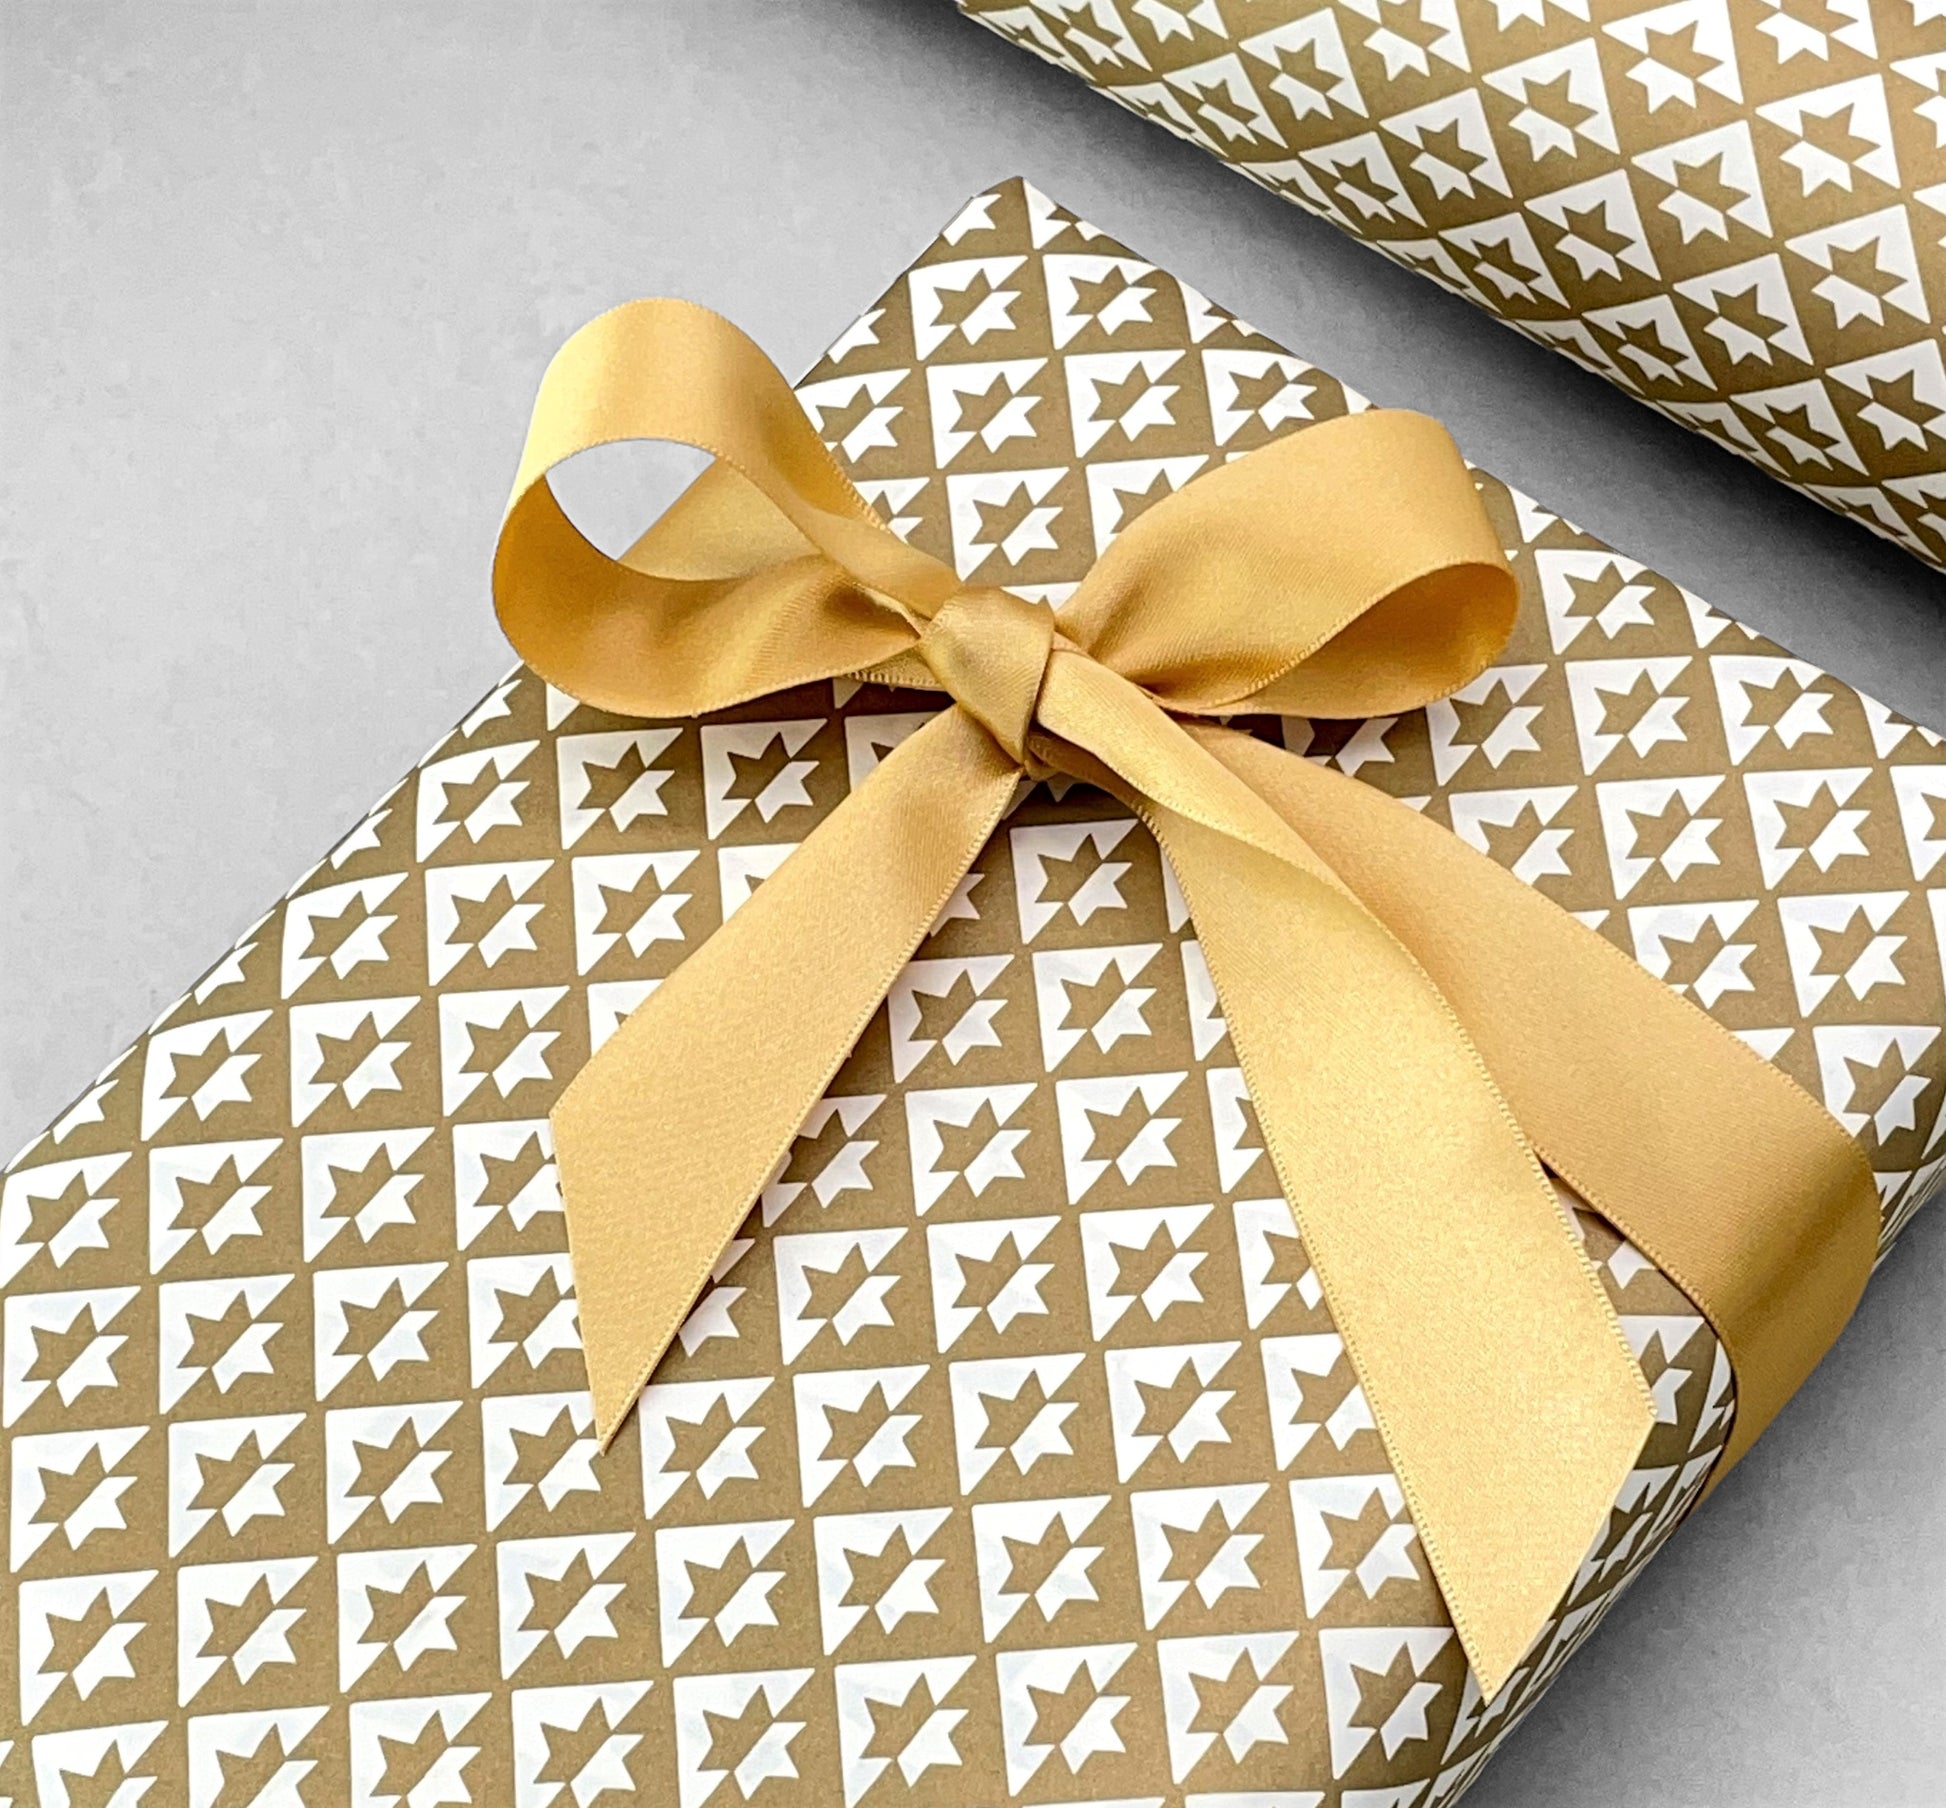 wrapping paper with an abstract star pattern in gold and white by Ola Studio